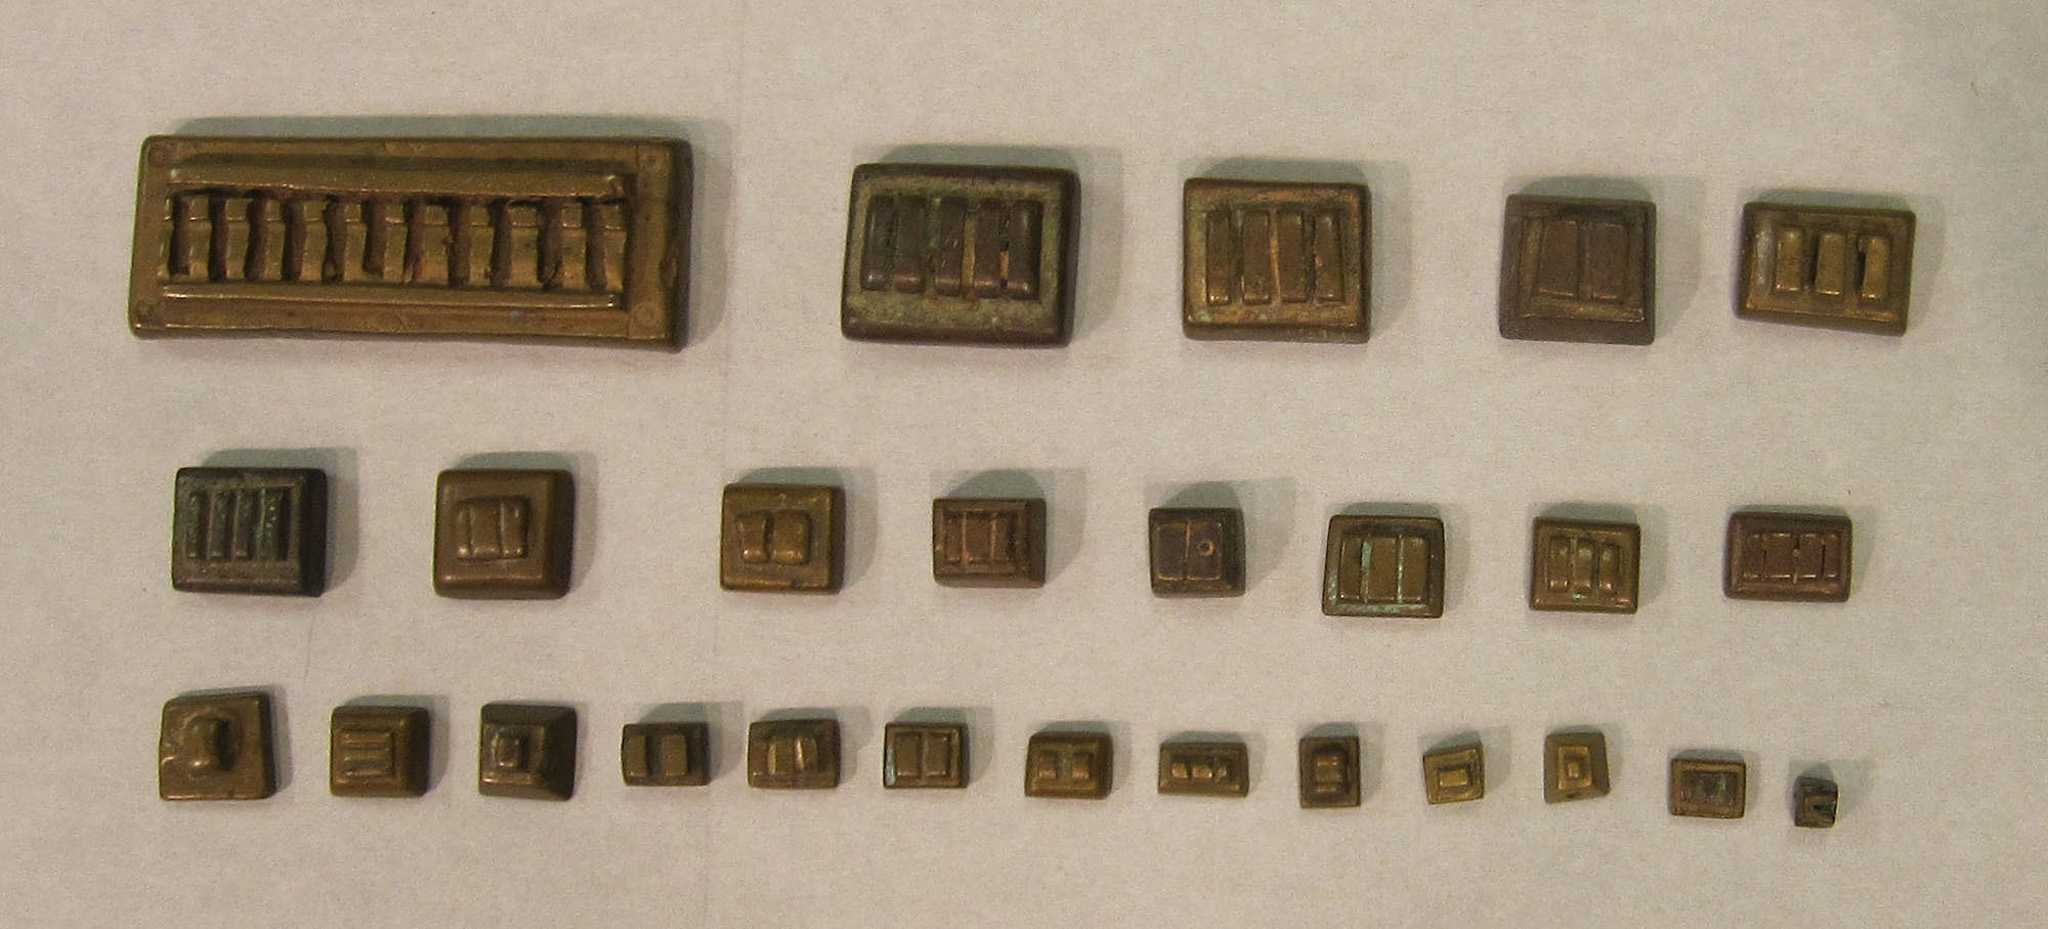 Photograph of geometric weights